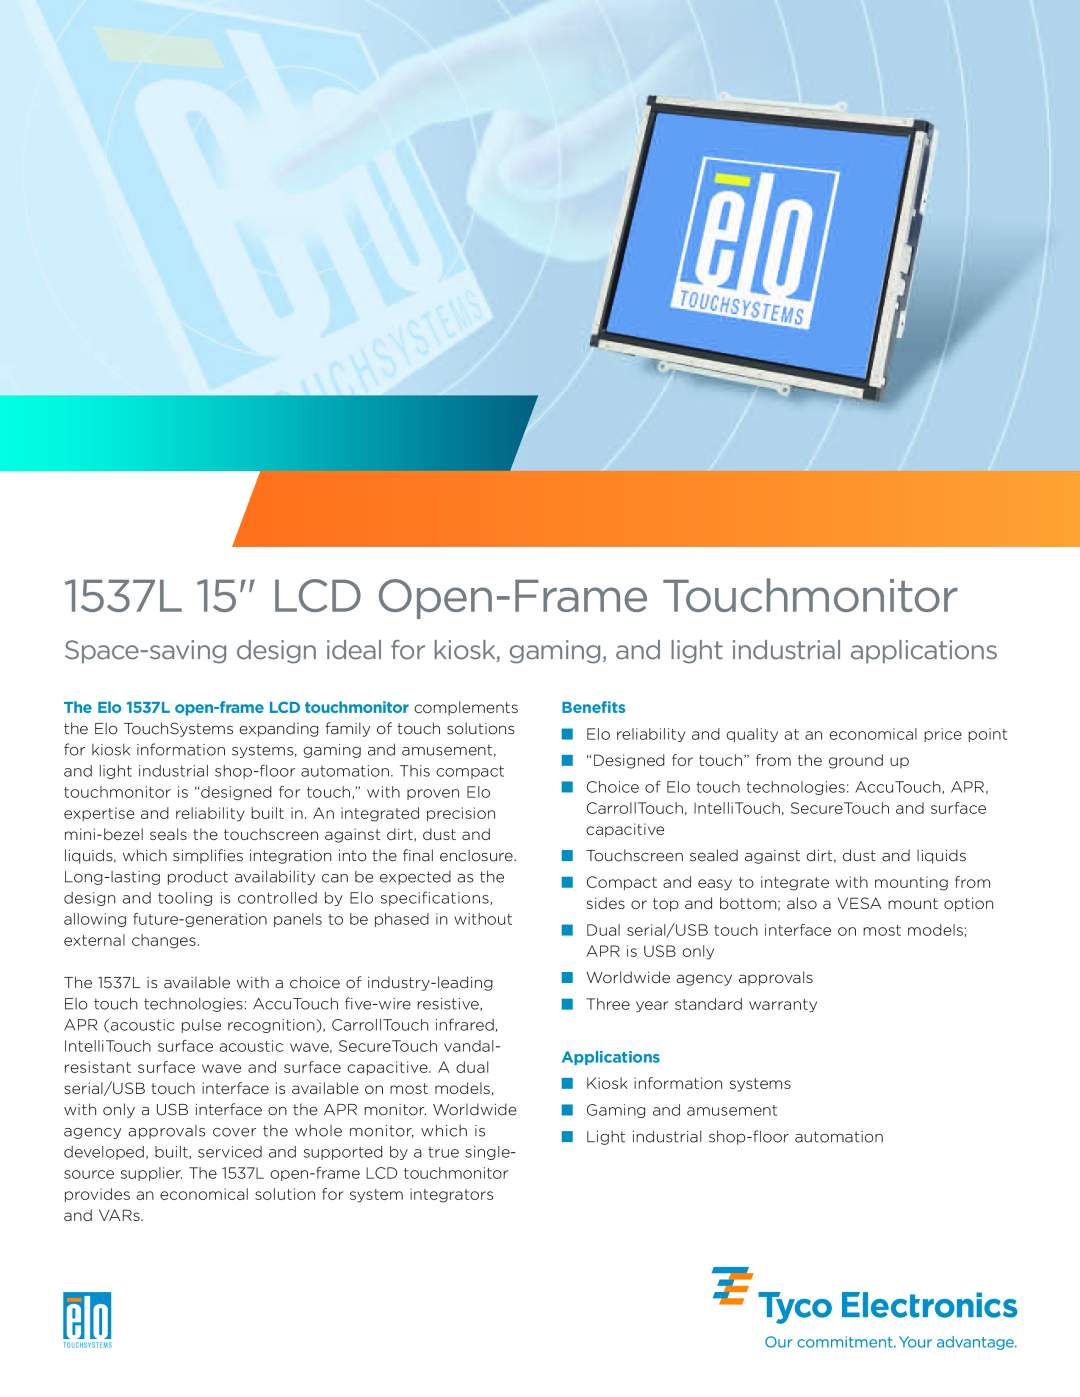 Elo TouchSystems specifications 1537L 15 LCD Open-Frame Touchmonitor 